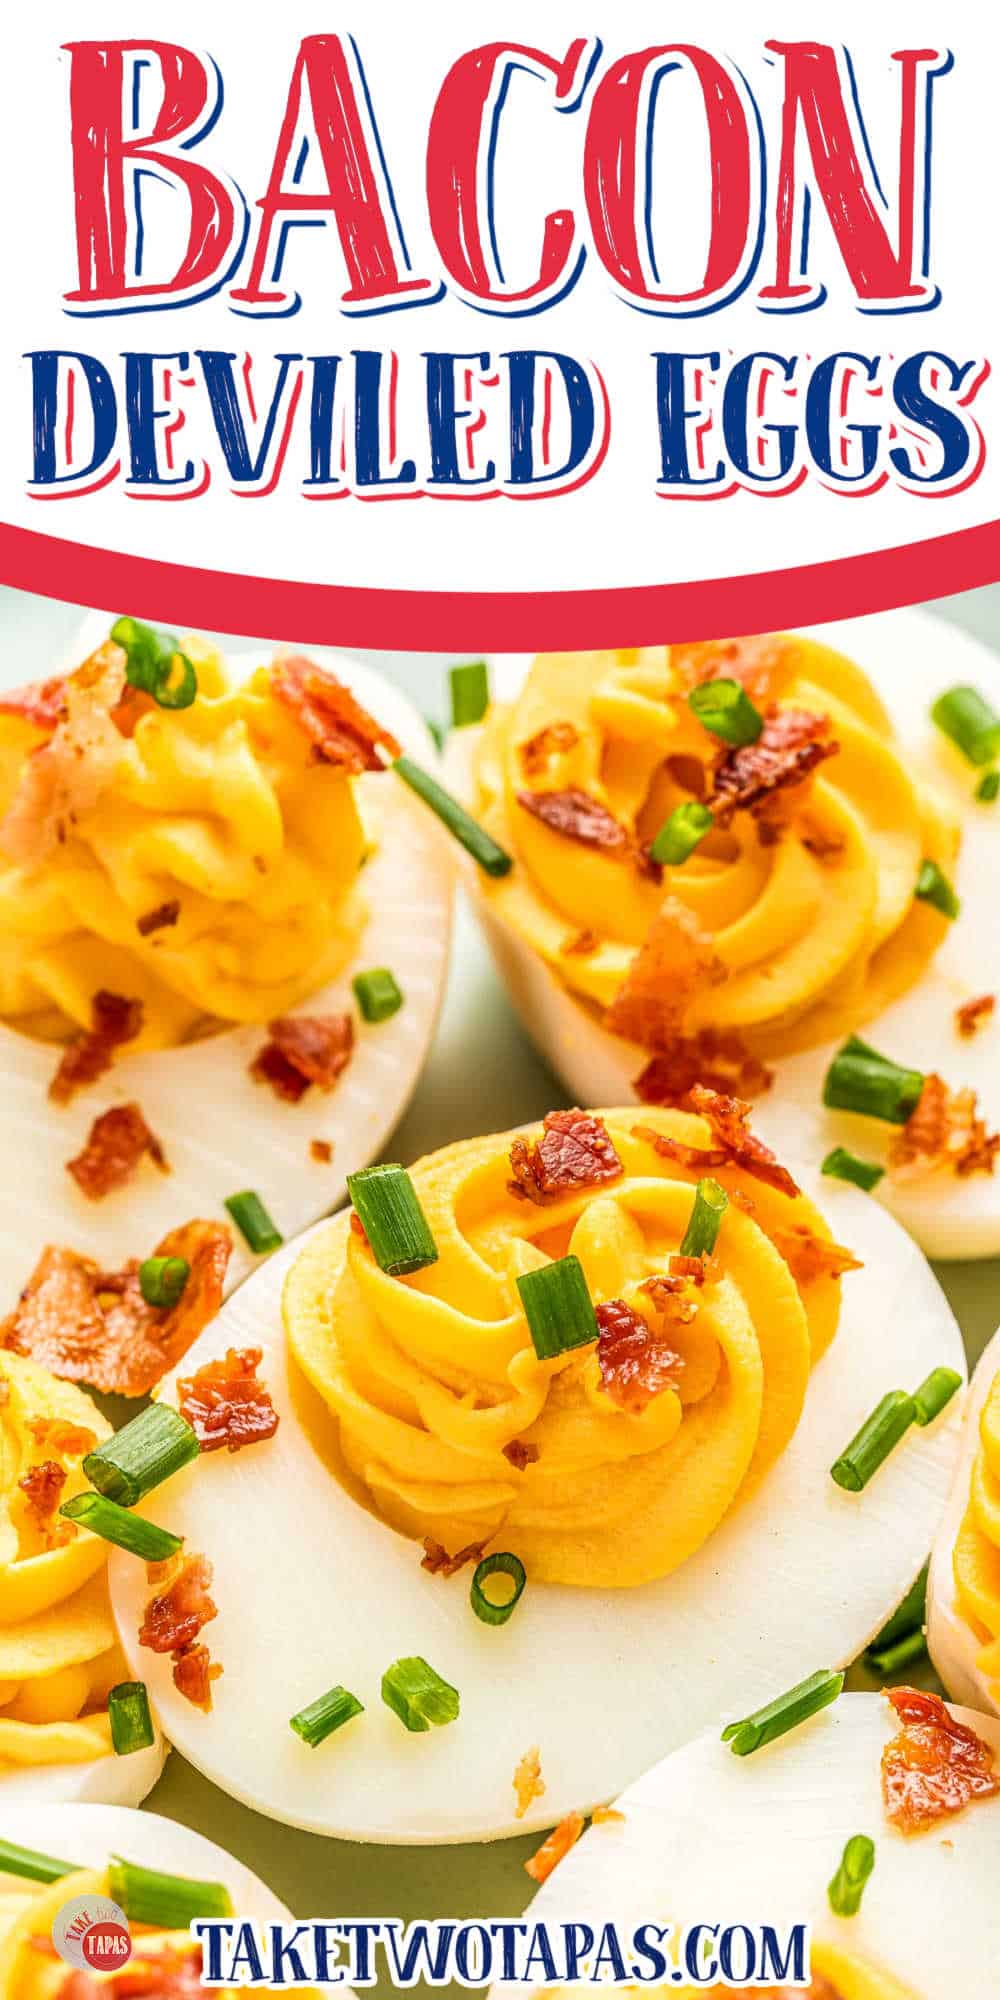 close up of deviled egg topped with bacon and a white banner with red text